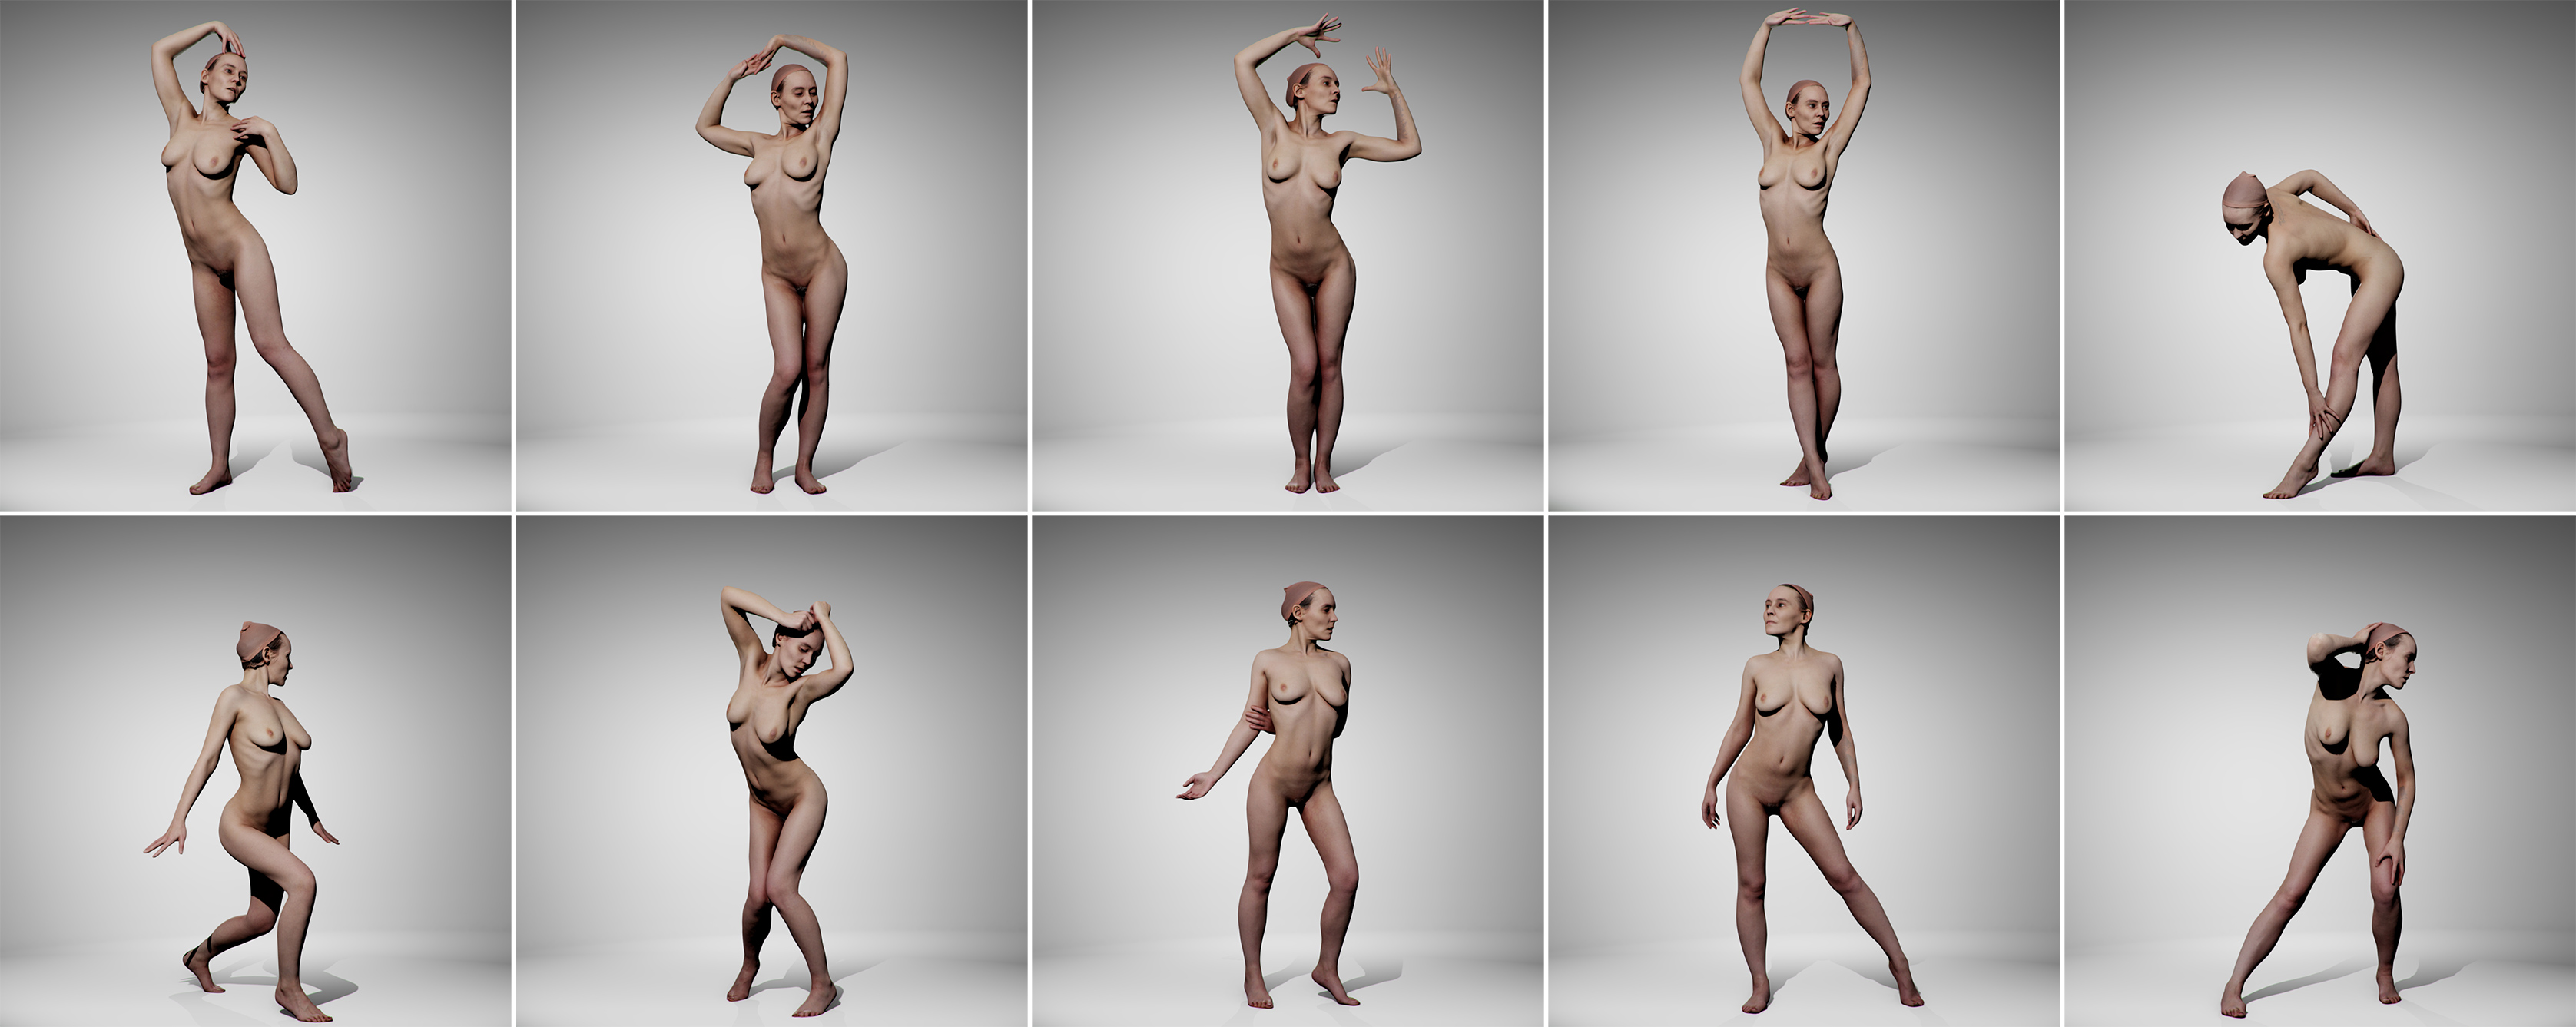 Different nude poses